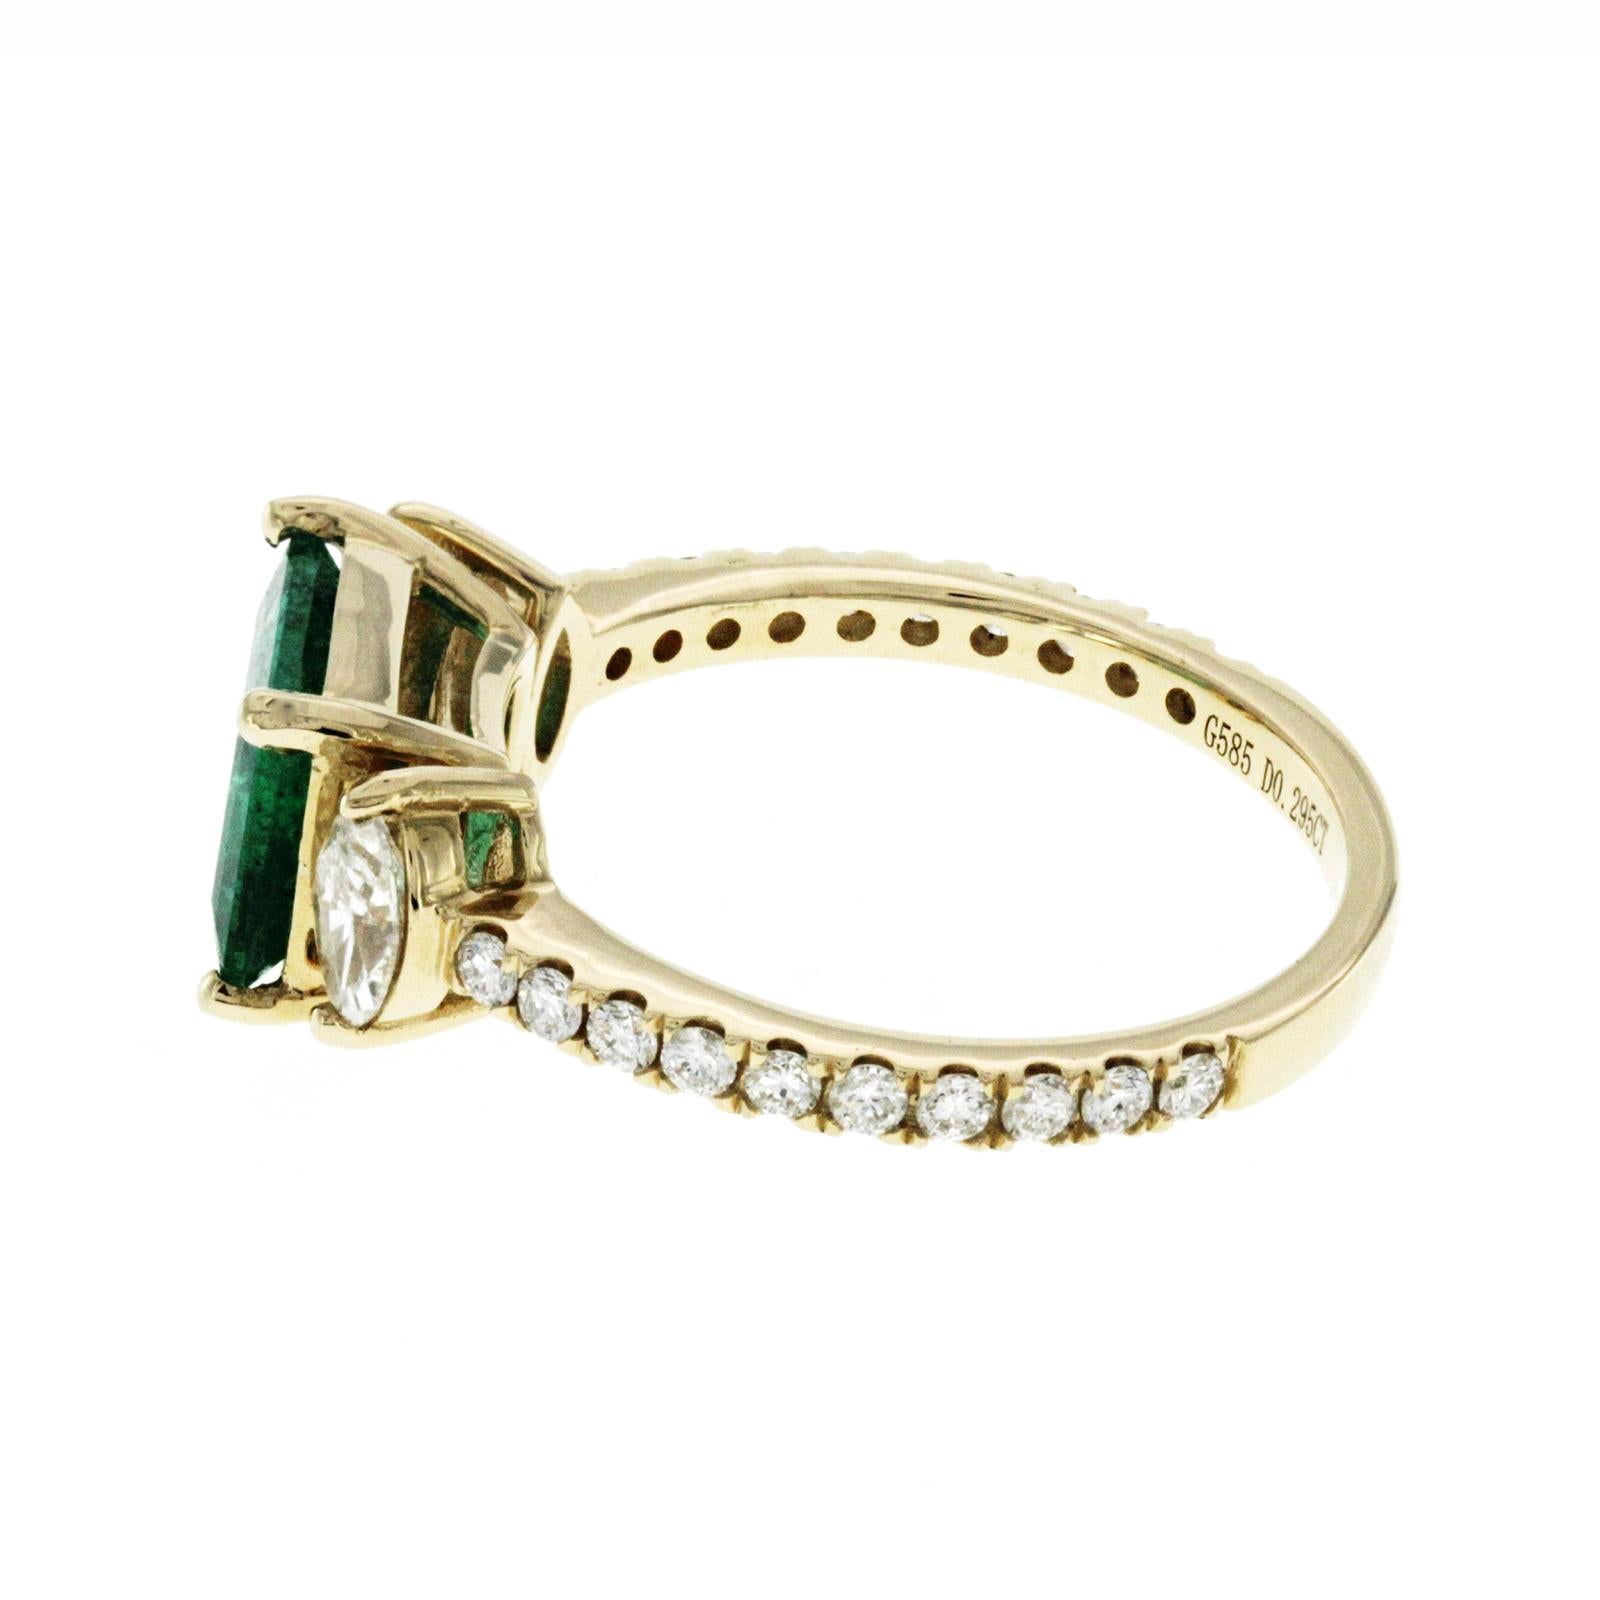 1.61 CT Zambian Emerald & 0.67 CT Diamonds in 14K Yellow Gold Engagement Ring In New Condition For Sale In Los Angeles, CA